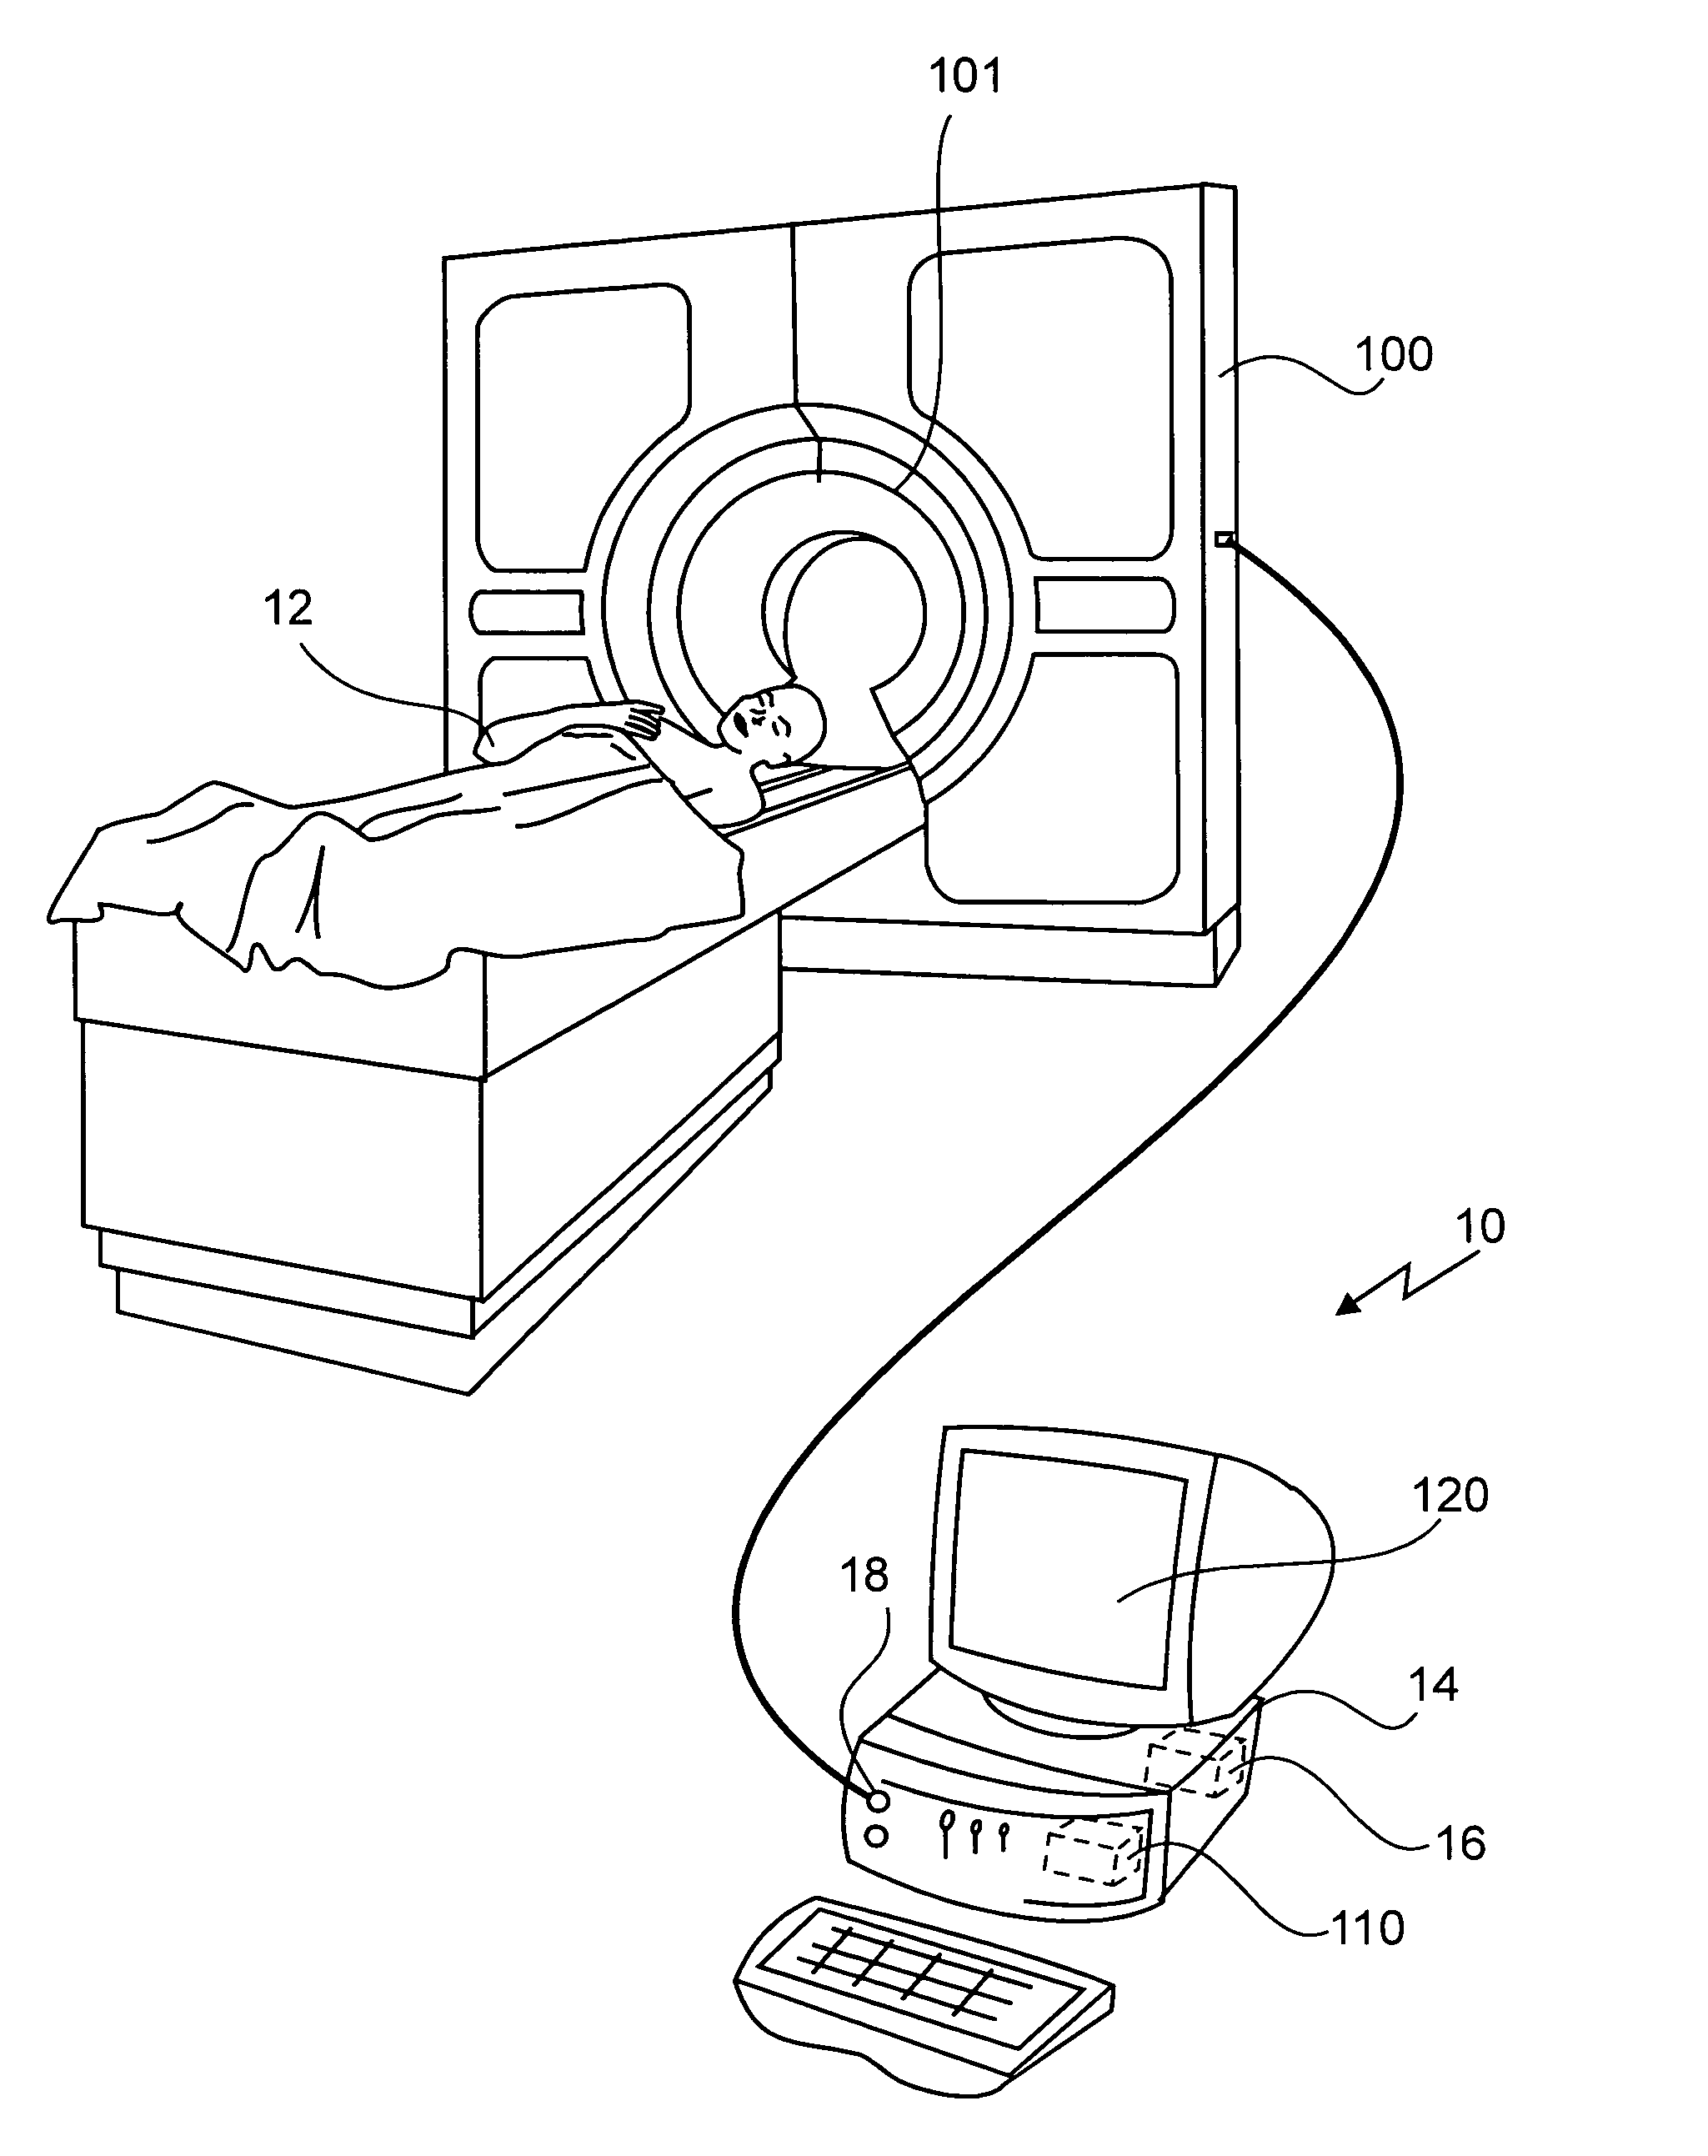 Method for tracking motion phase of an object for correcting organ motion artifacts in X-ray CT systems